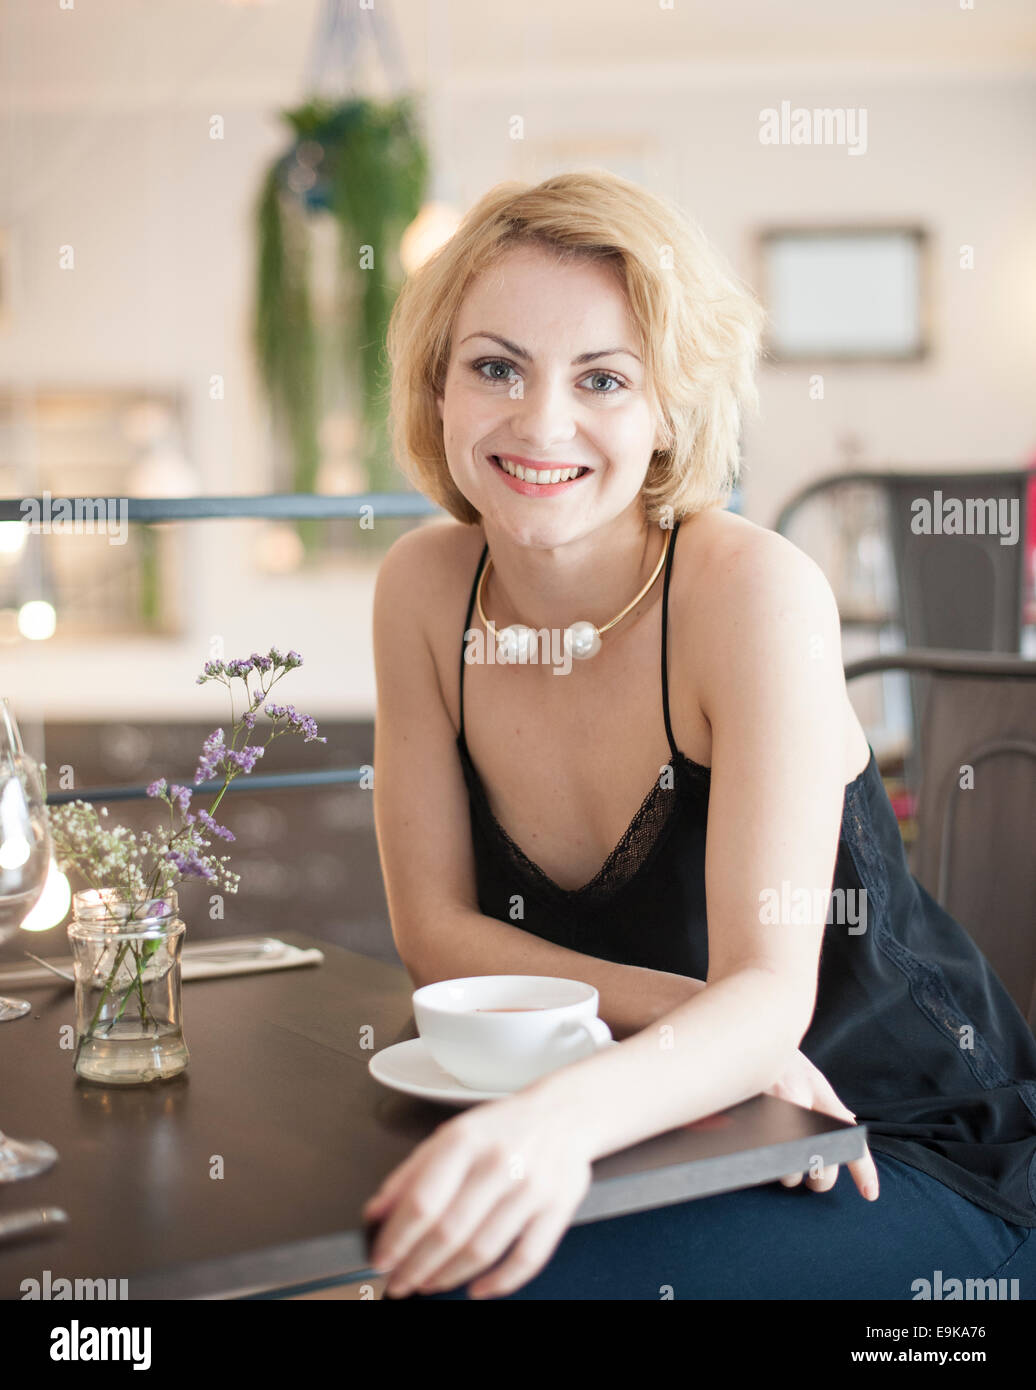 Portrait of happy young woman sitting at restaurant table Stock Photo